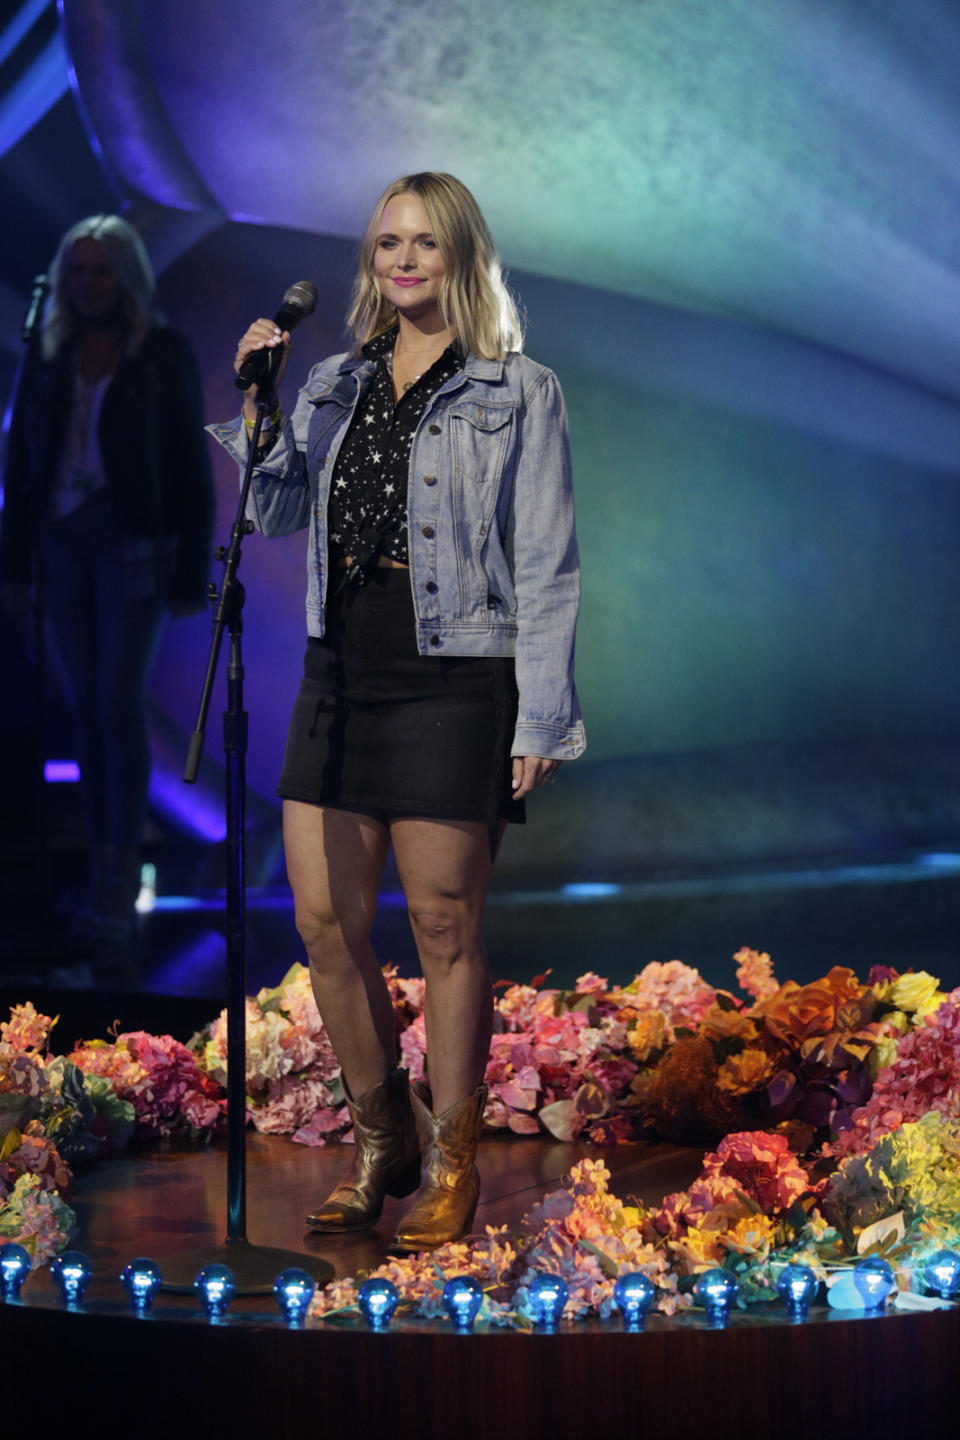 LOS ANGELES - MARCH 9: Miranda Lambert rehearsing for THE 63rd ANNUAL GRAMMY® AWARDS, broadcast live from the STAPLES Center in Los Angeles, Sunday, March 14, 2021 (8:00-11:30 PM, live ET/5:00-8:30 PM, live PT) on the CBS Television Network and Paramount+. (Photo by Francis Specker/CBS via Getty Images)